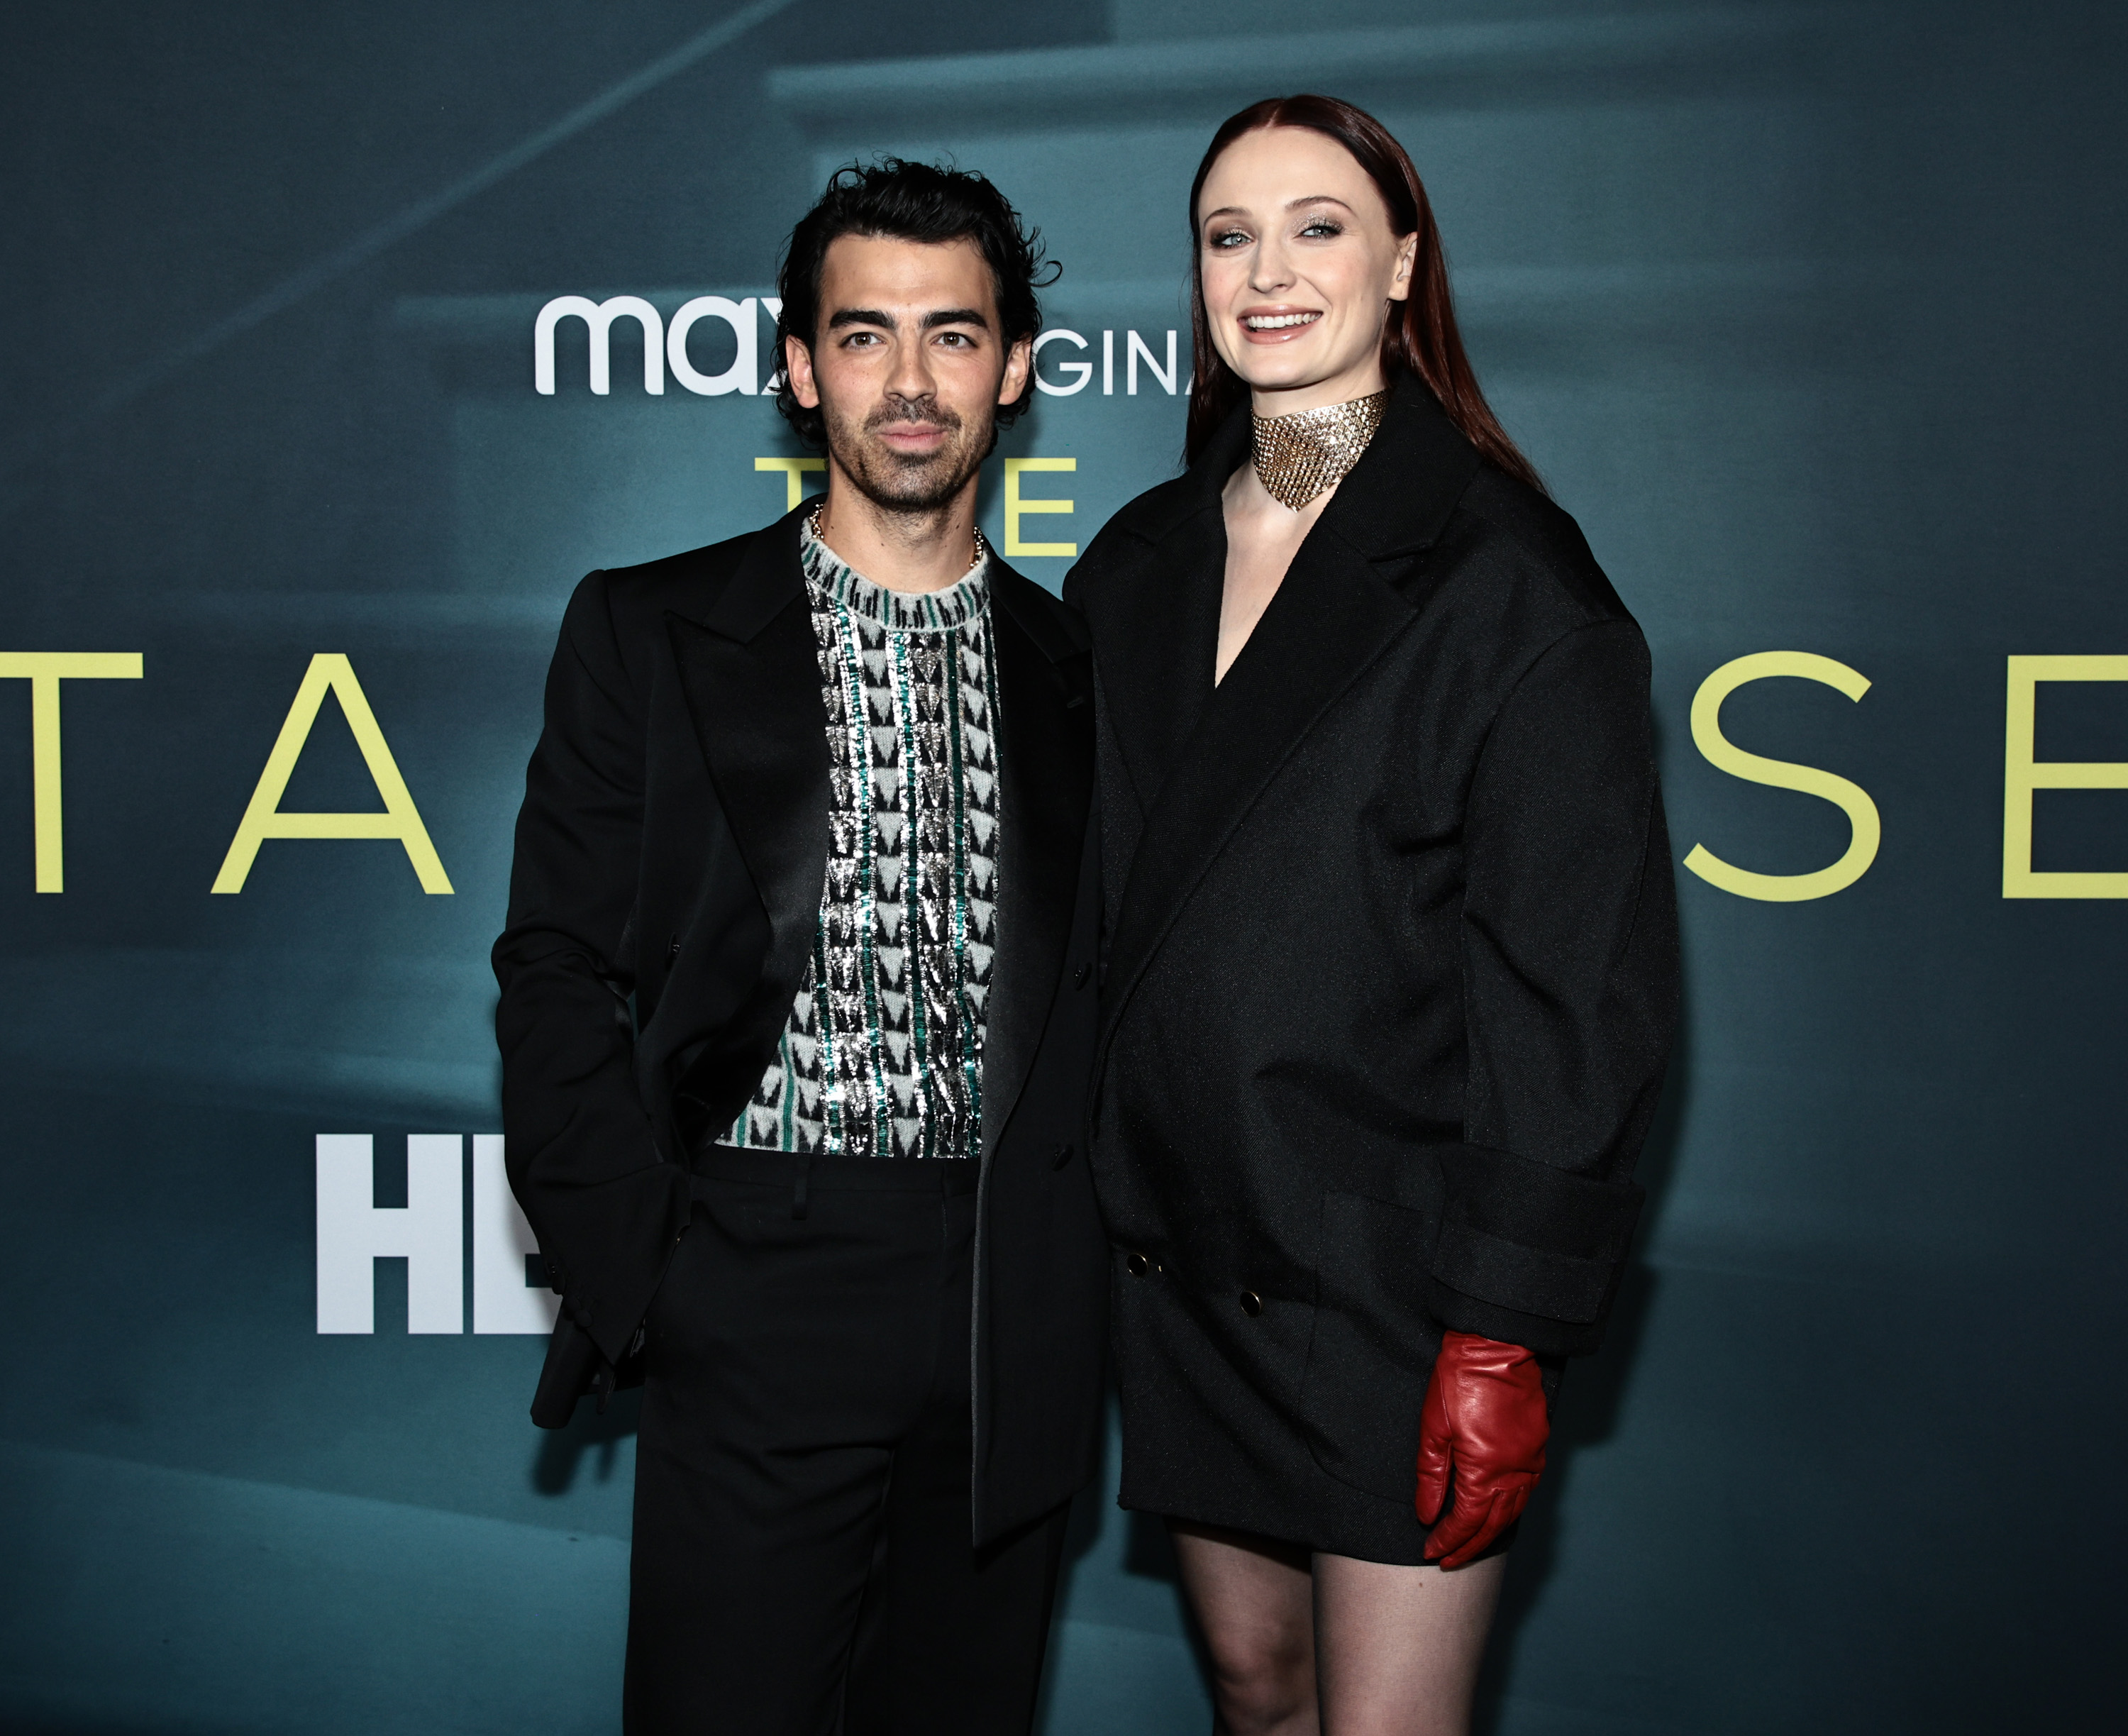 Joe Jonas and Sophie Turner pose together at a media event.